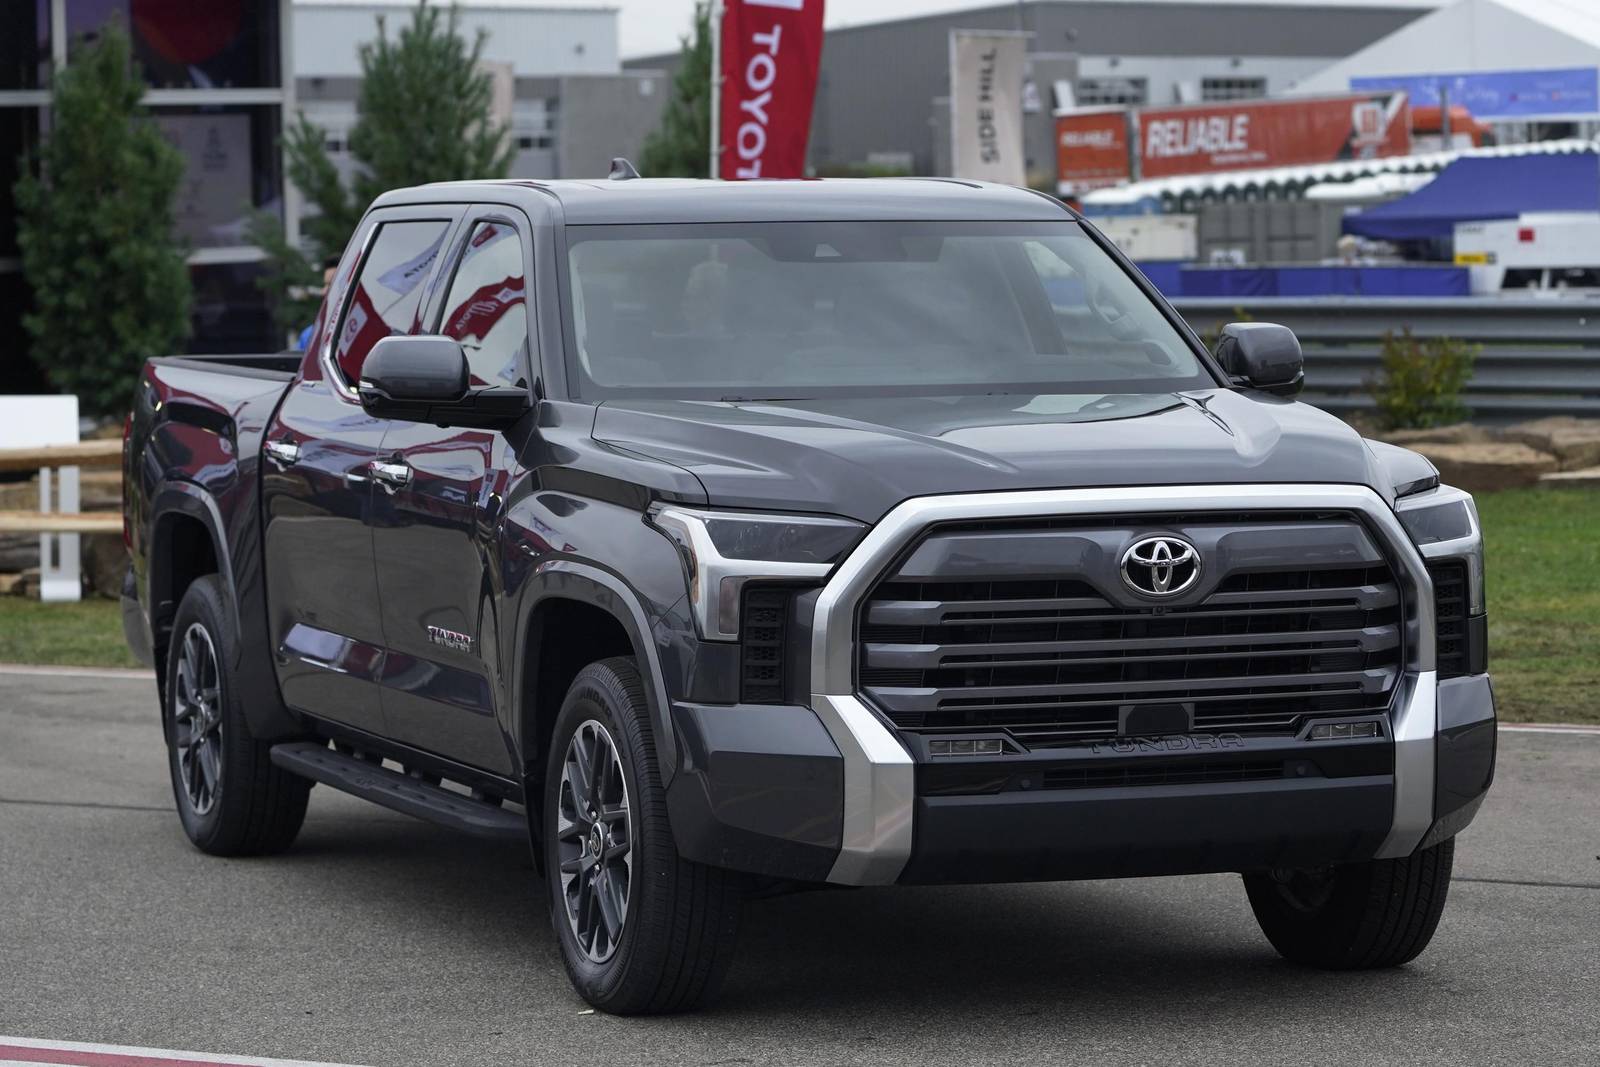 Toyota scraps V8 in Tundra redesign, adds hybrid powertrain – AgriNews